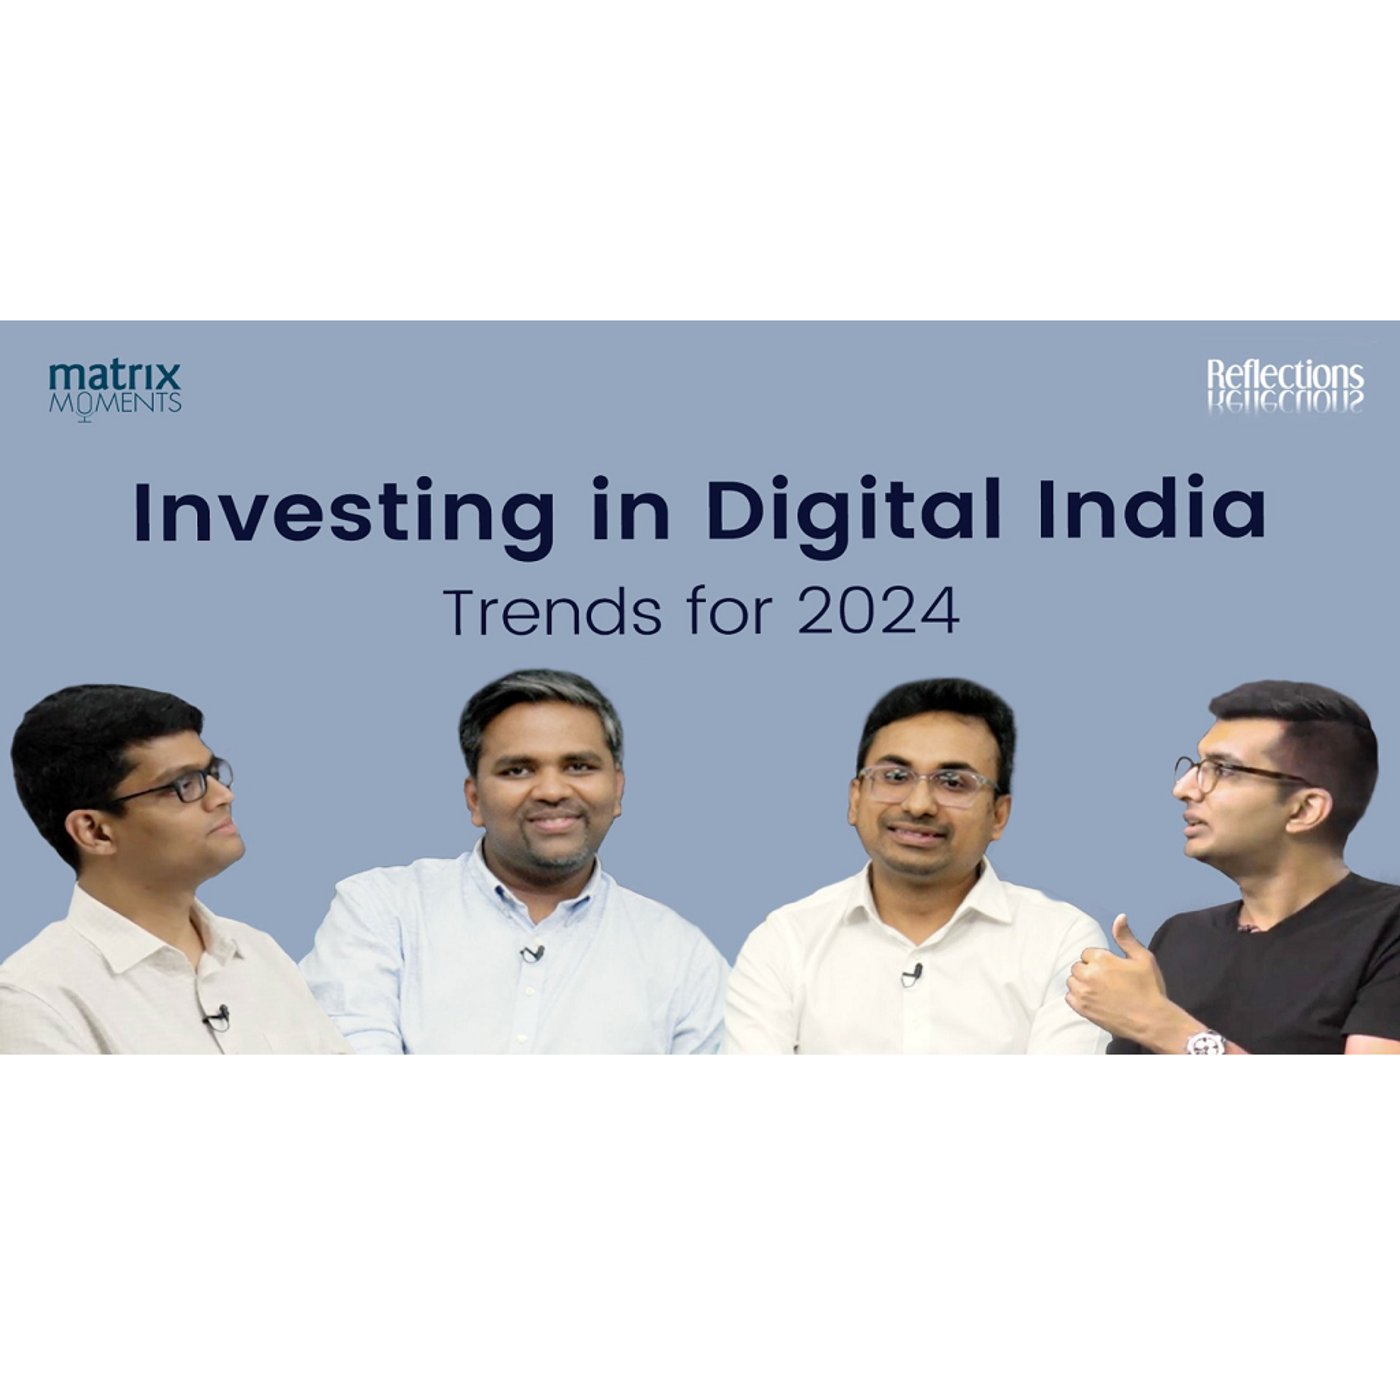 183: Investing in Digital India - Trends for 2024